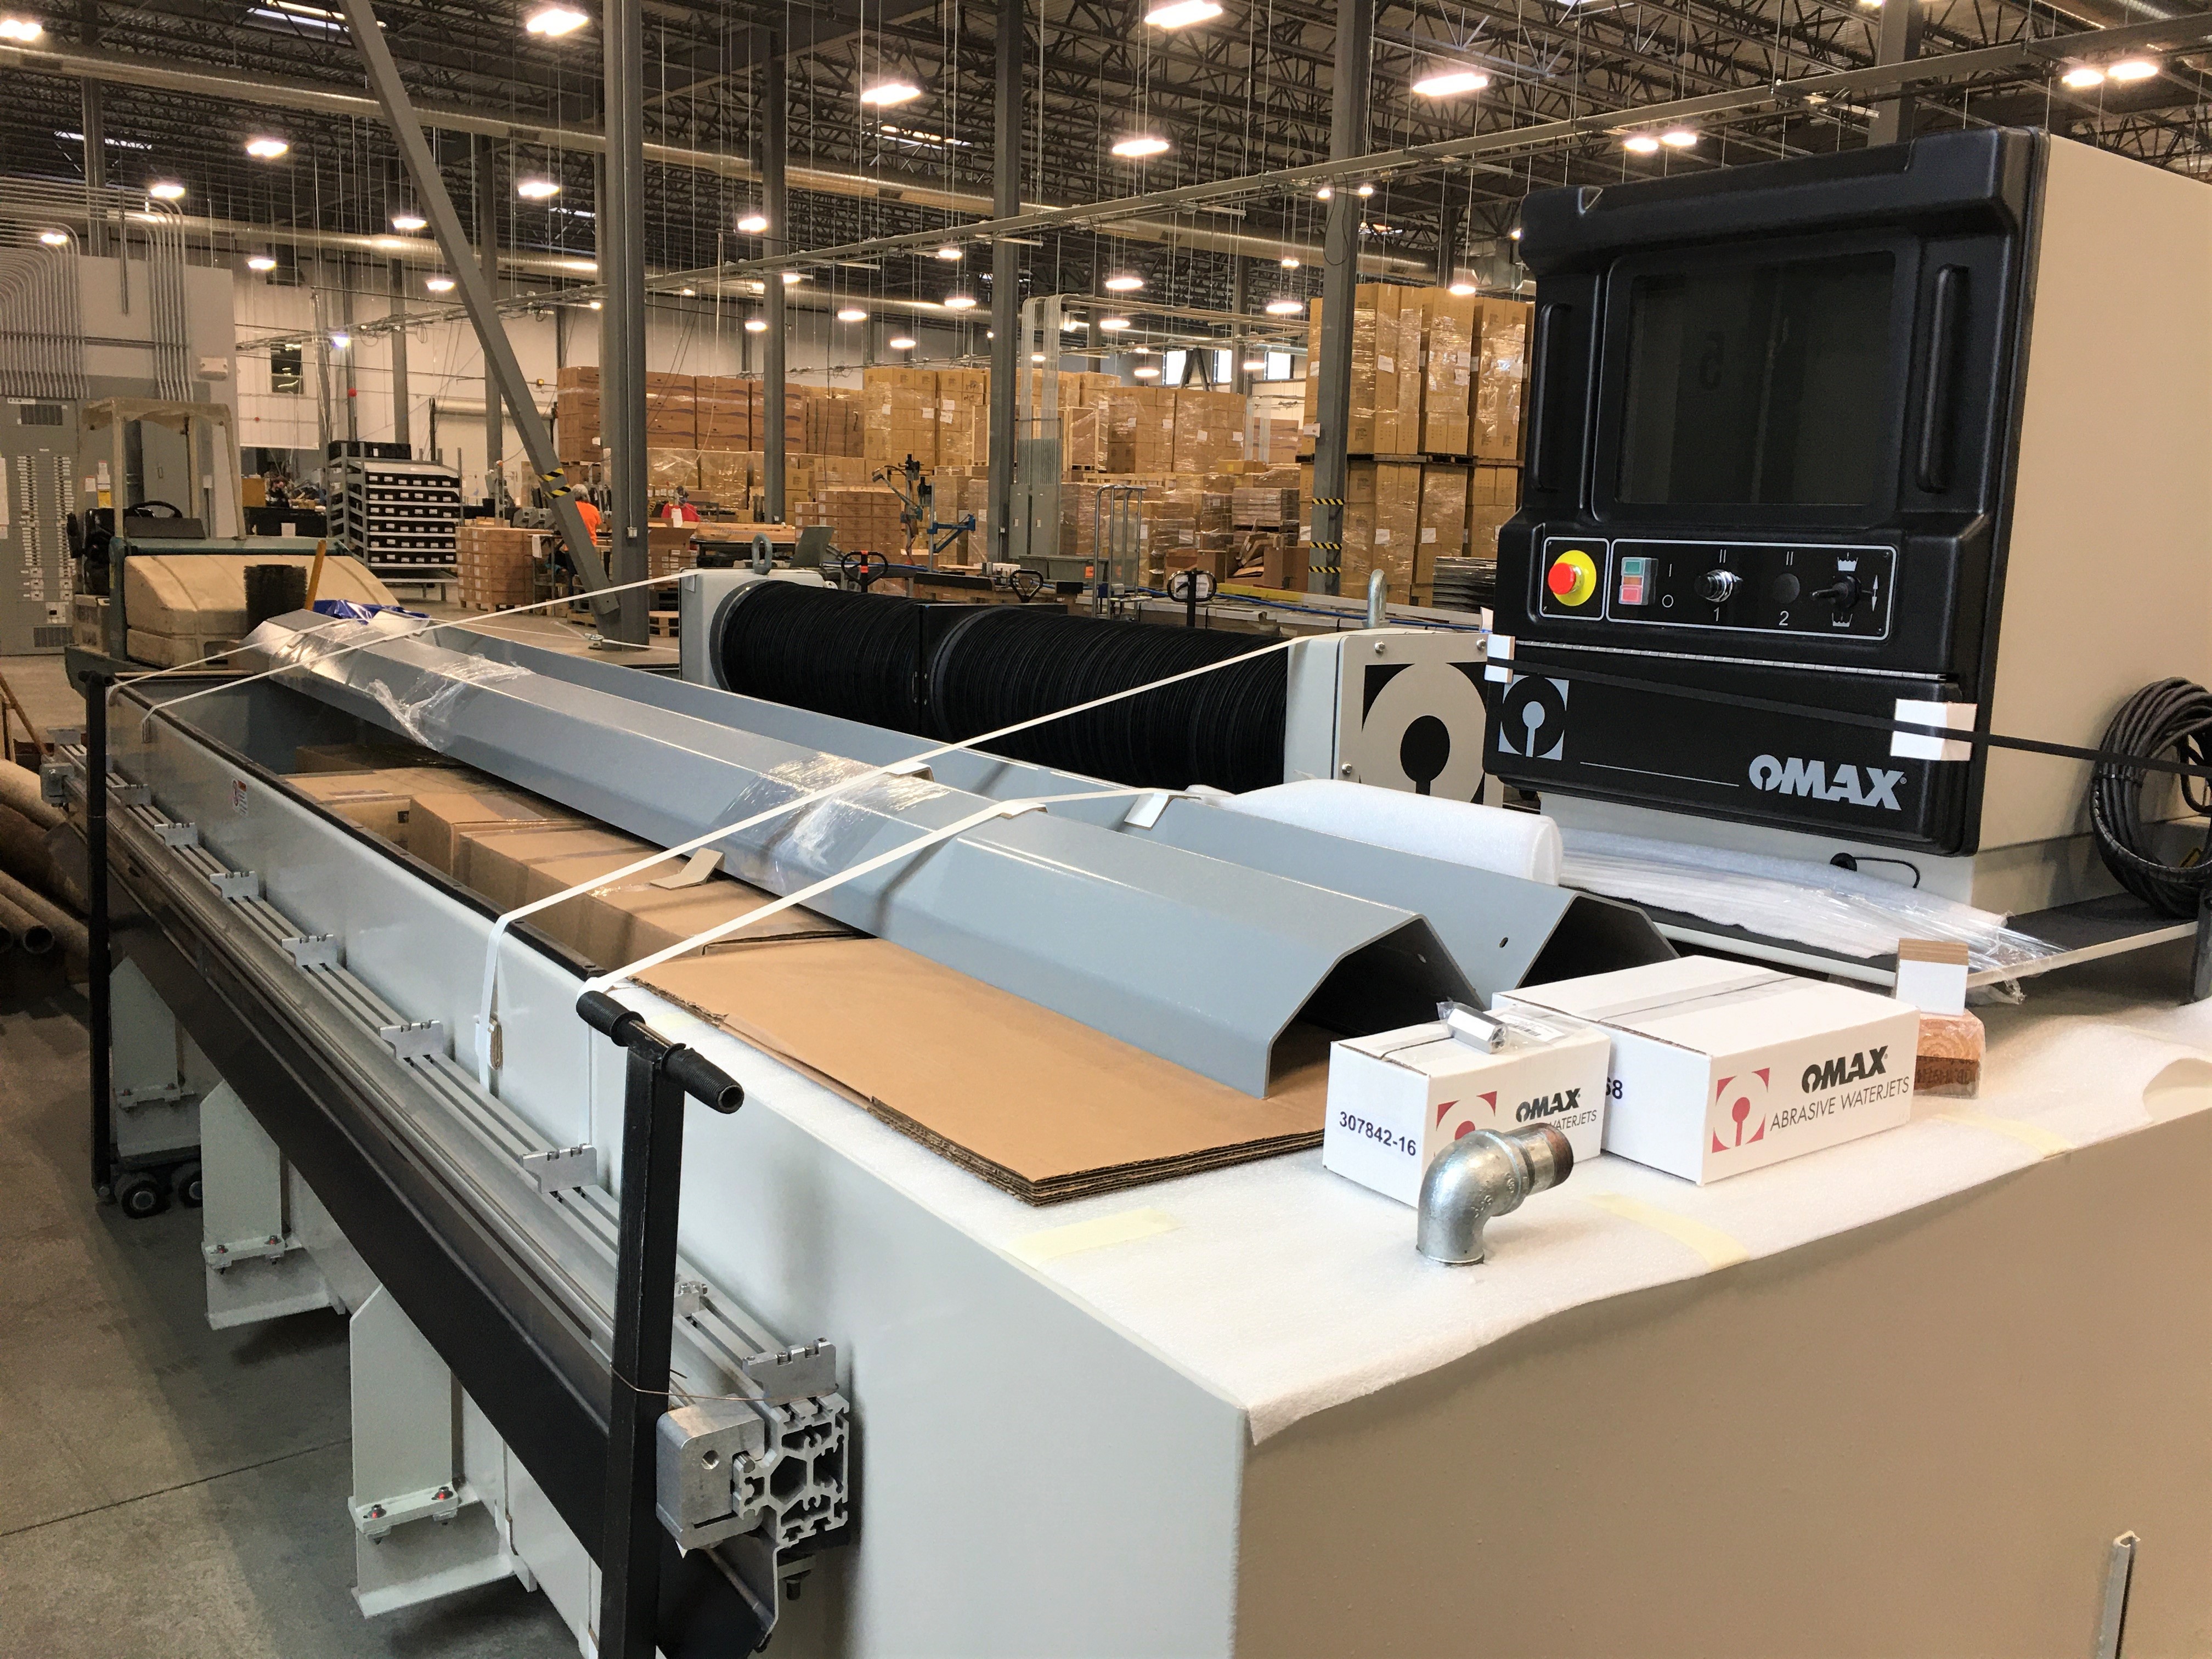 [News Release] Manufacturing Solutions Inc. Invests in State-of-the-Art 5-Axis Waterjet Cutting Technology